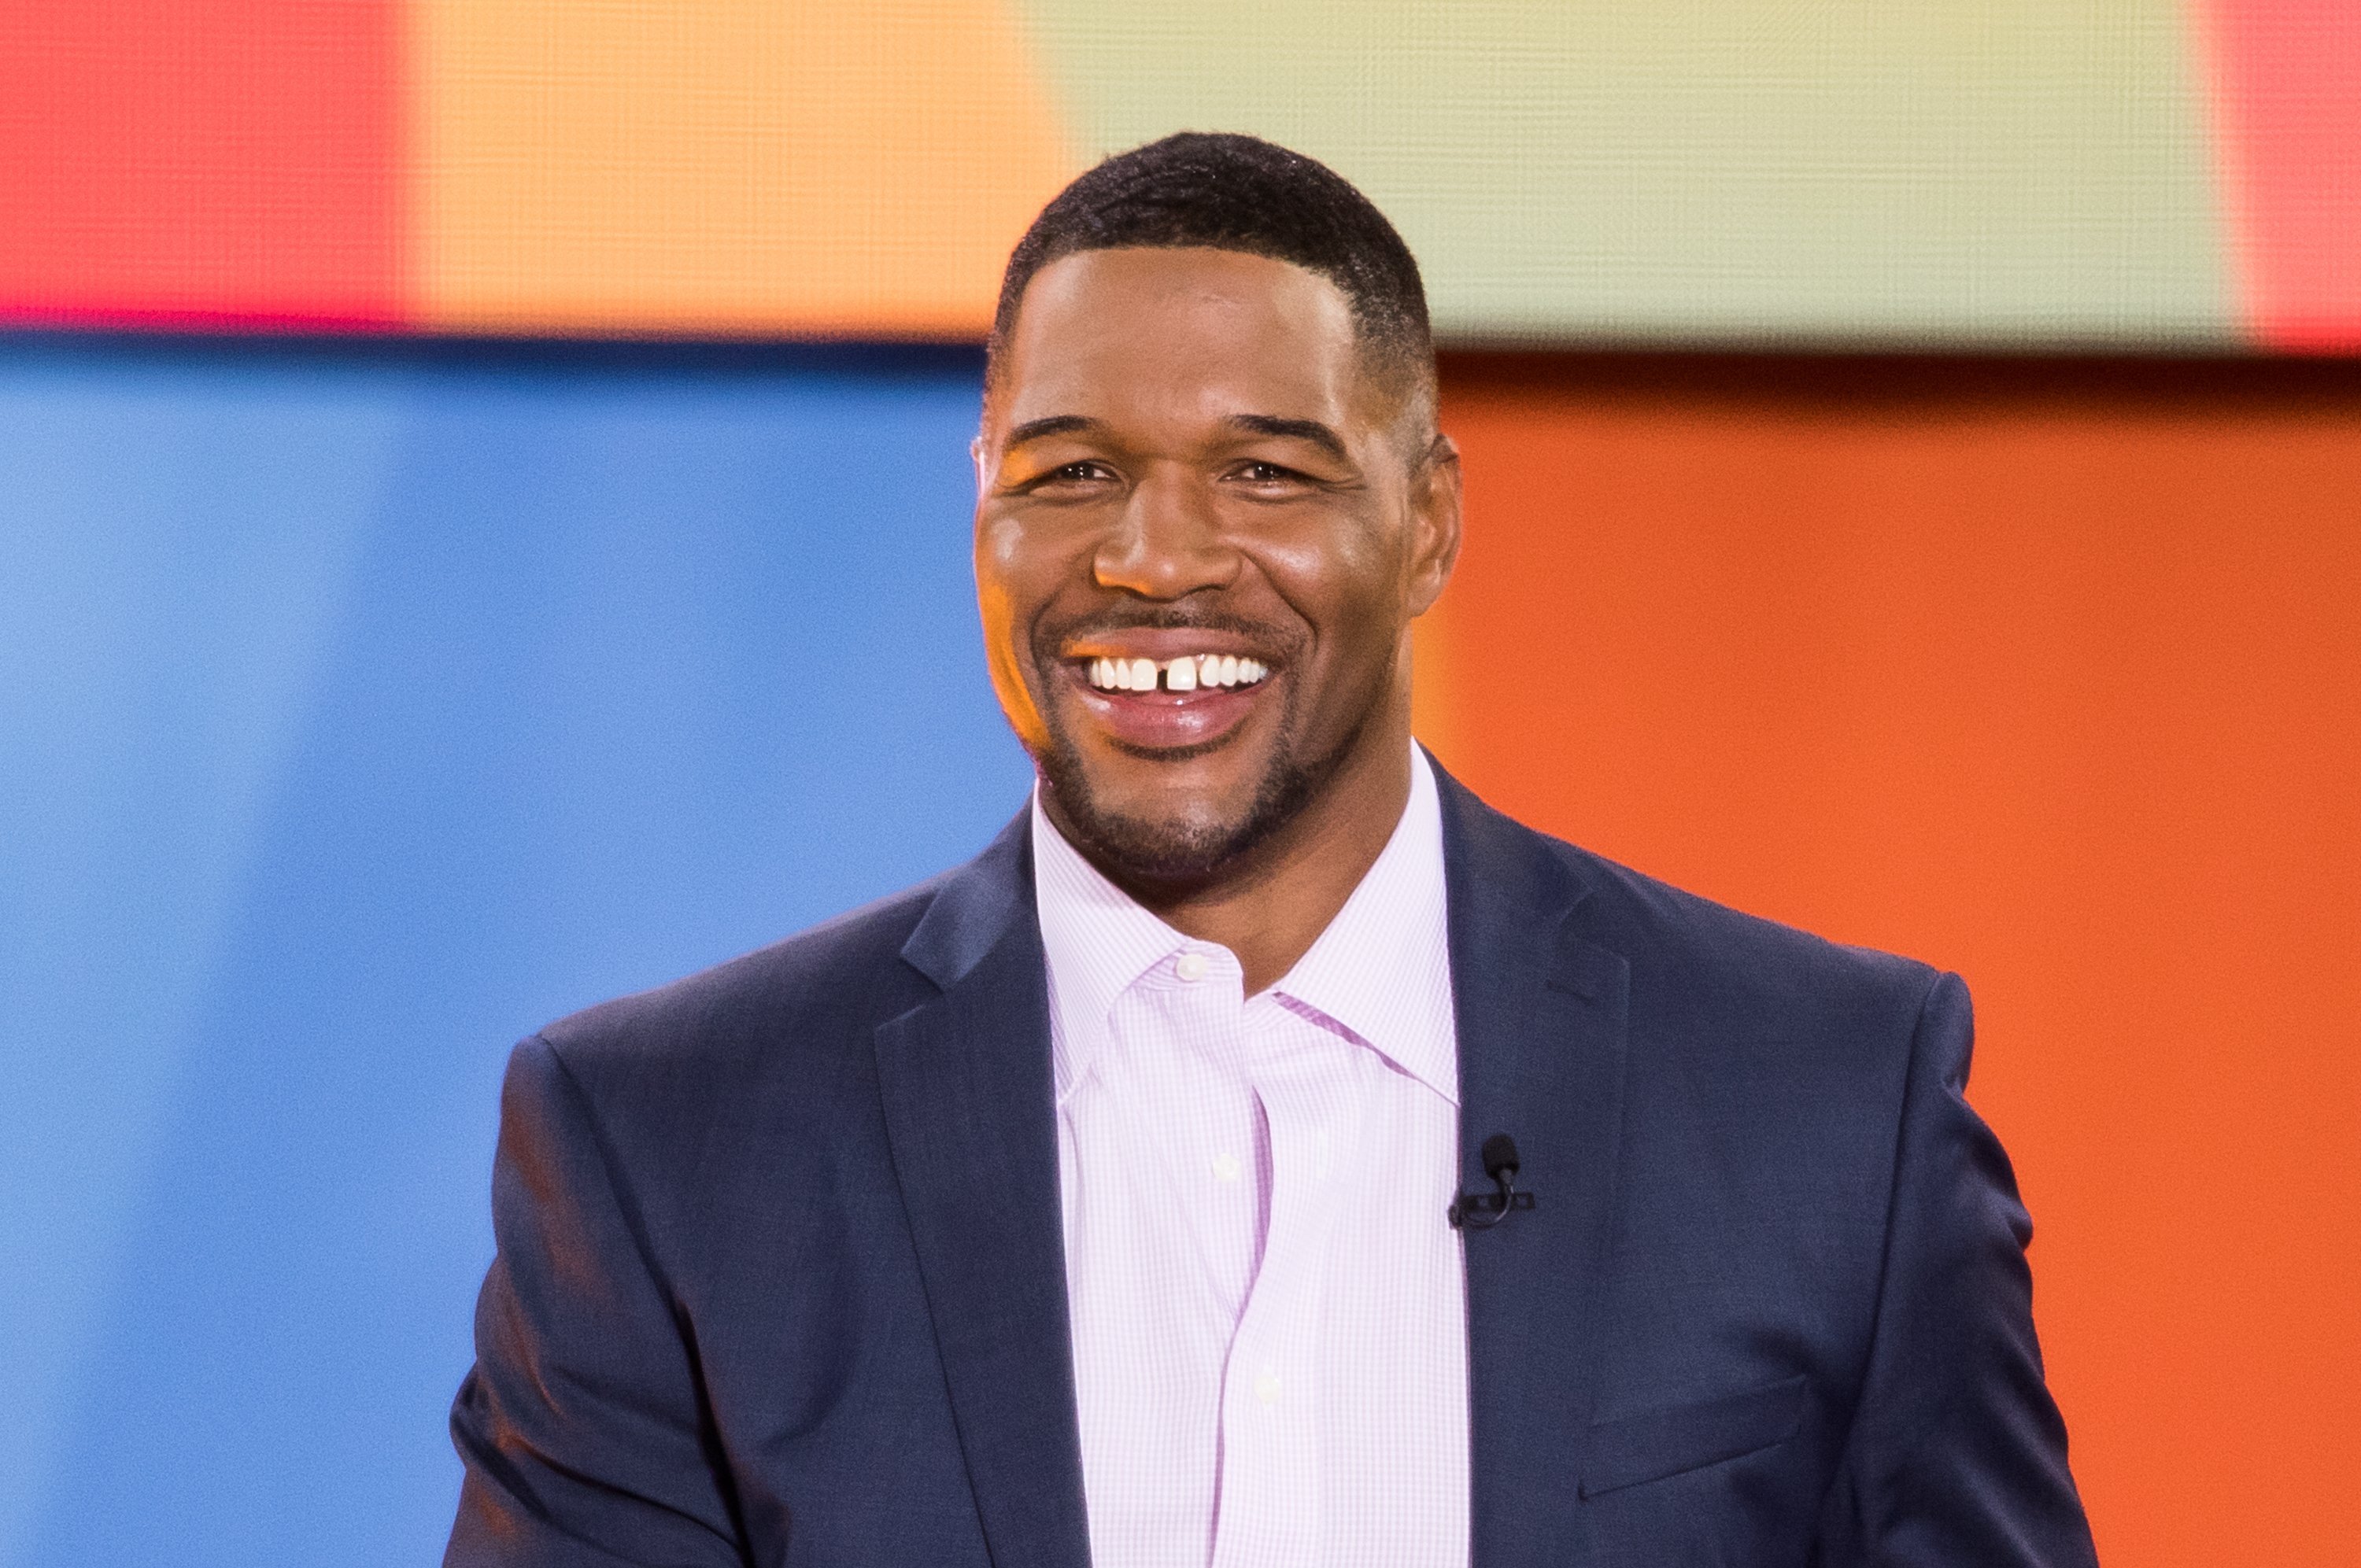 Michael Strahan attends ABC's "Good Morning America" at Rumsey Playfield, Central Park on July 6, 2018 | Photo: GettyImages